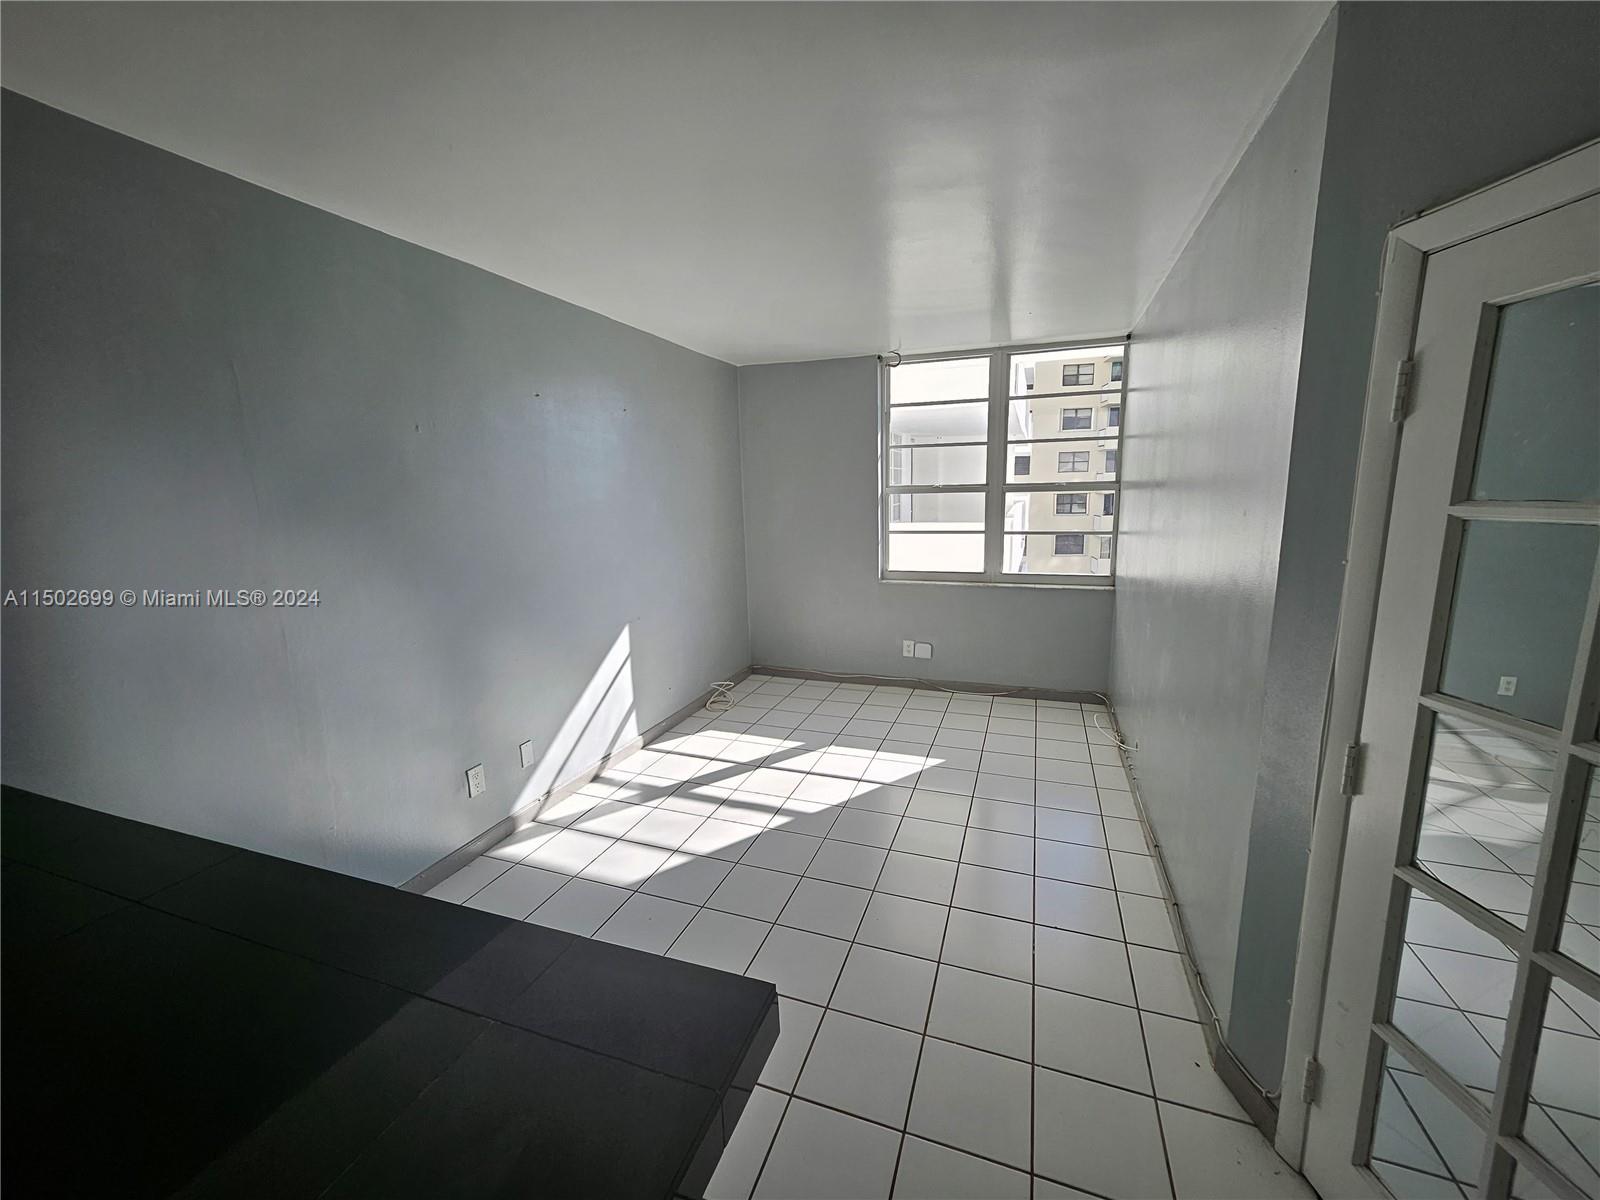 a view of empty room with window